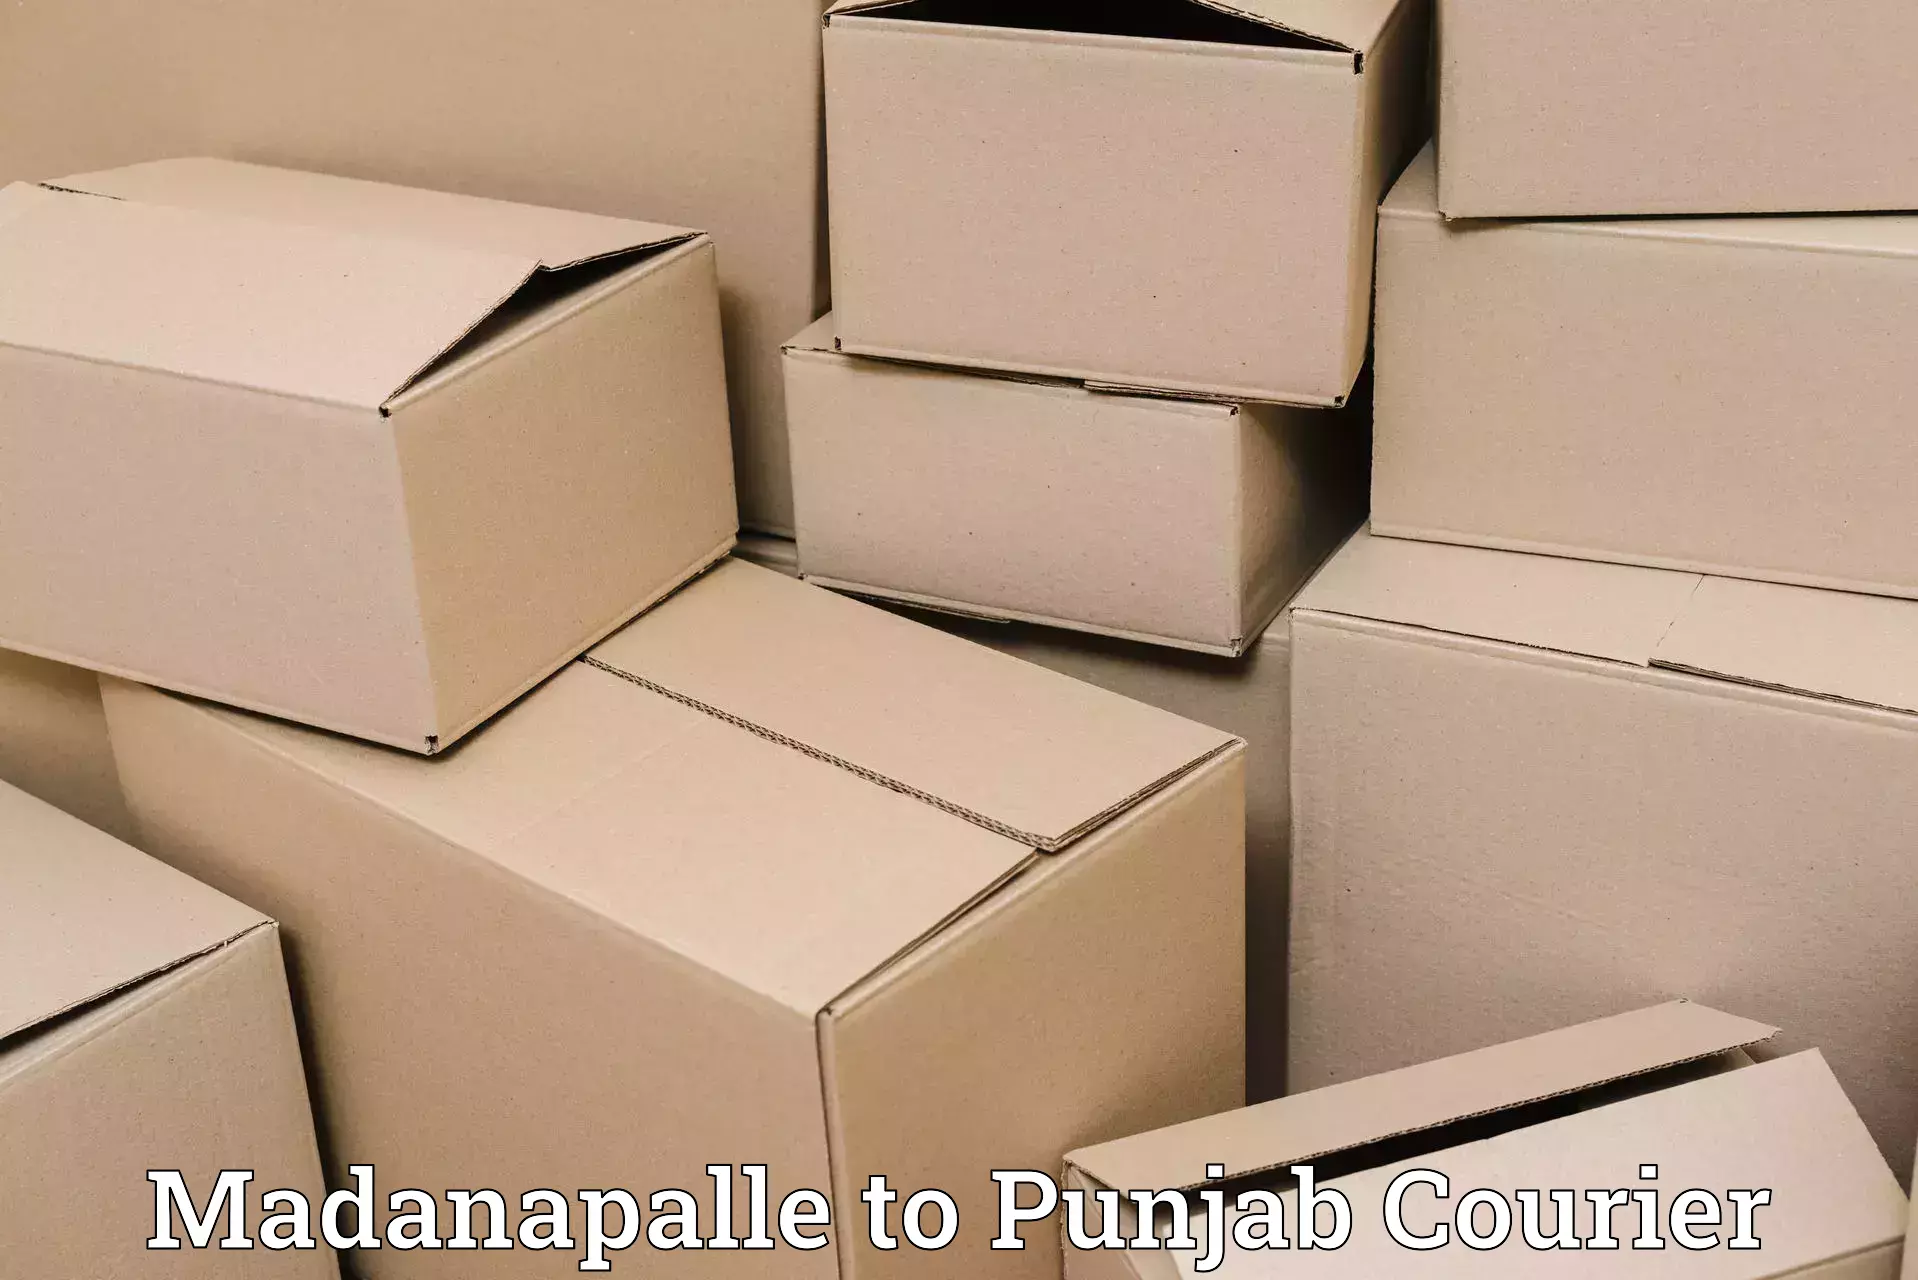 Affordable parcel service Madanapalle to Rajpura